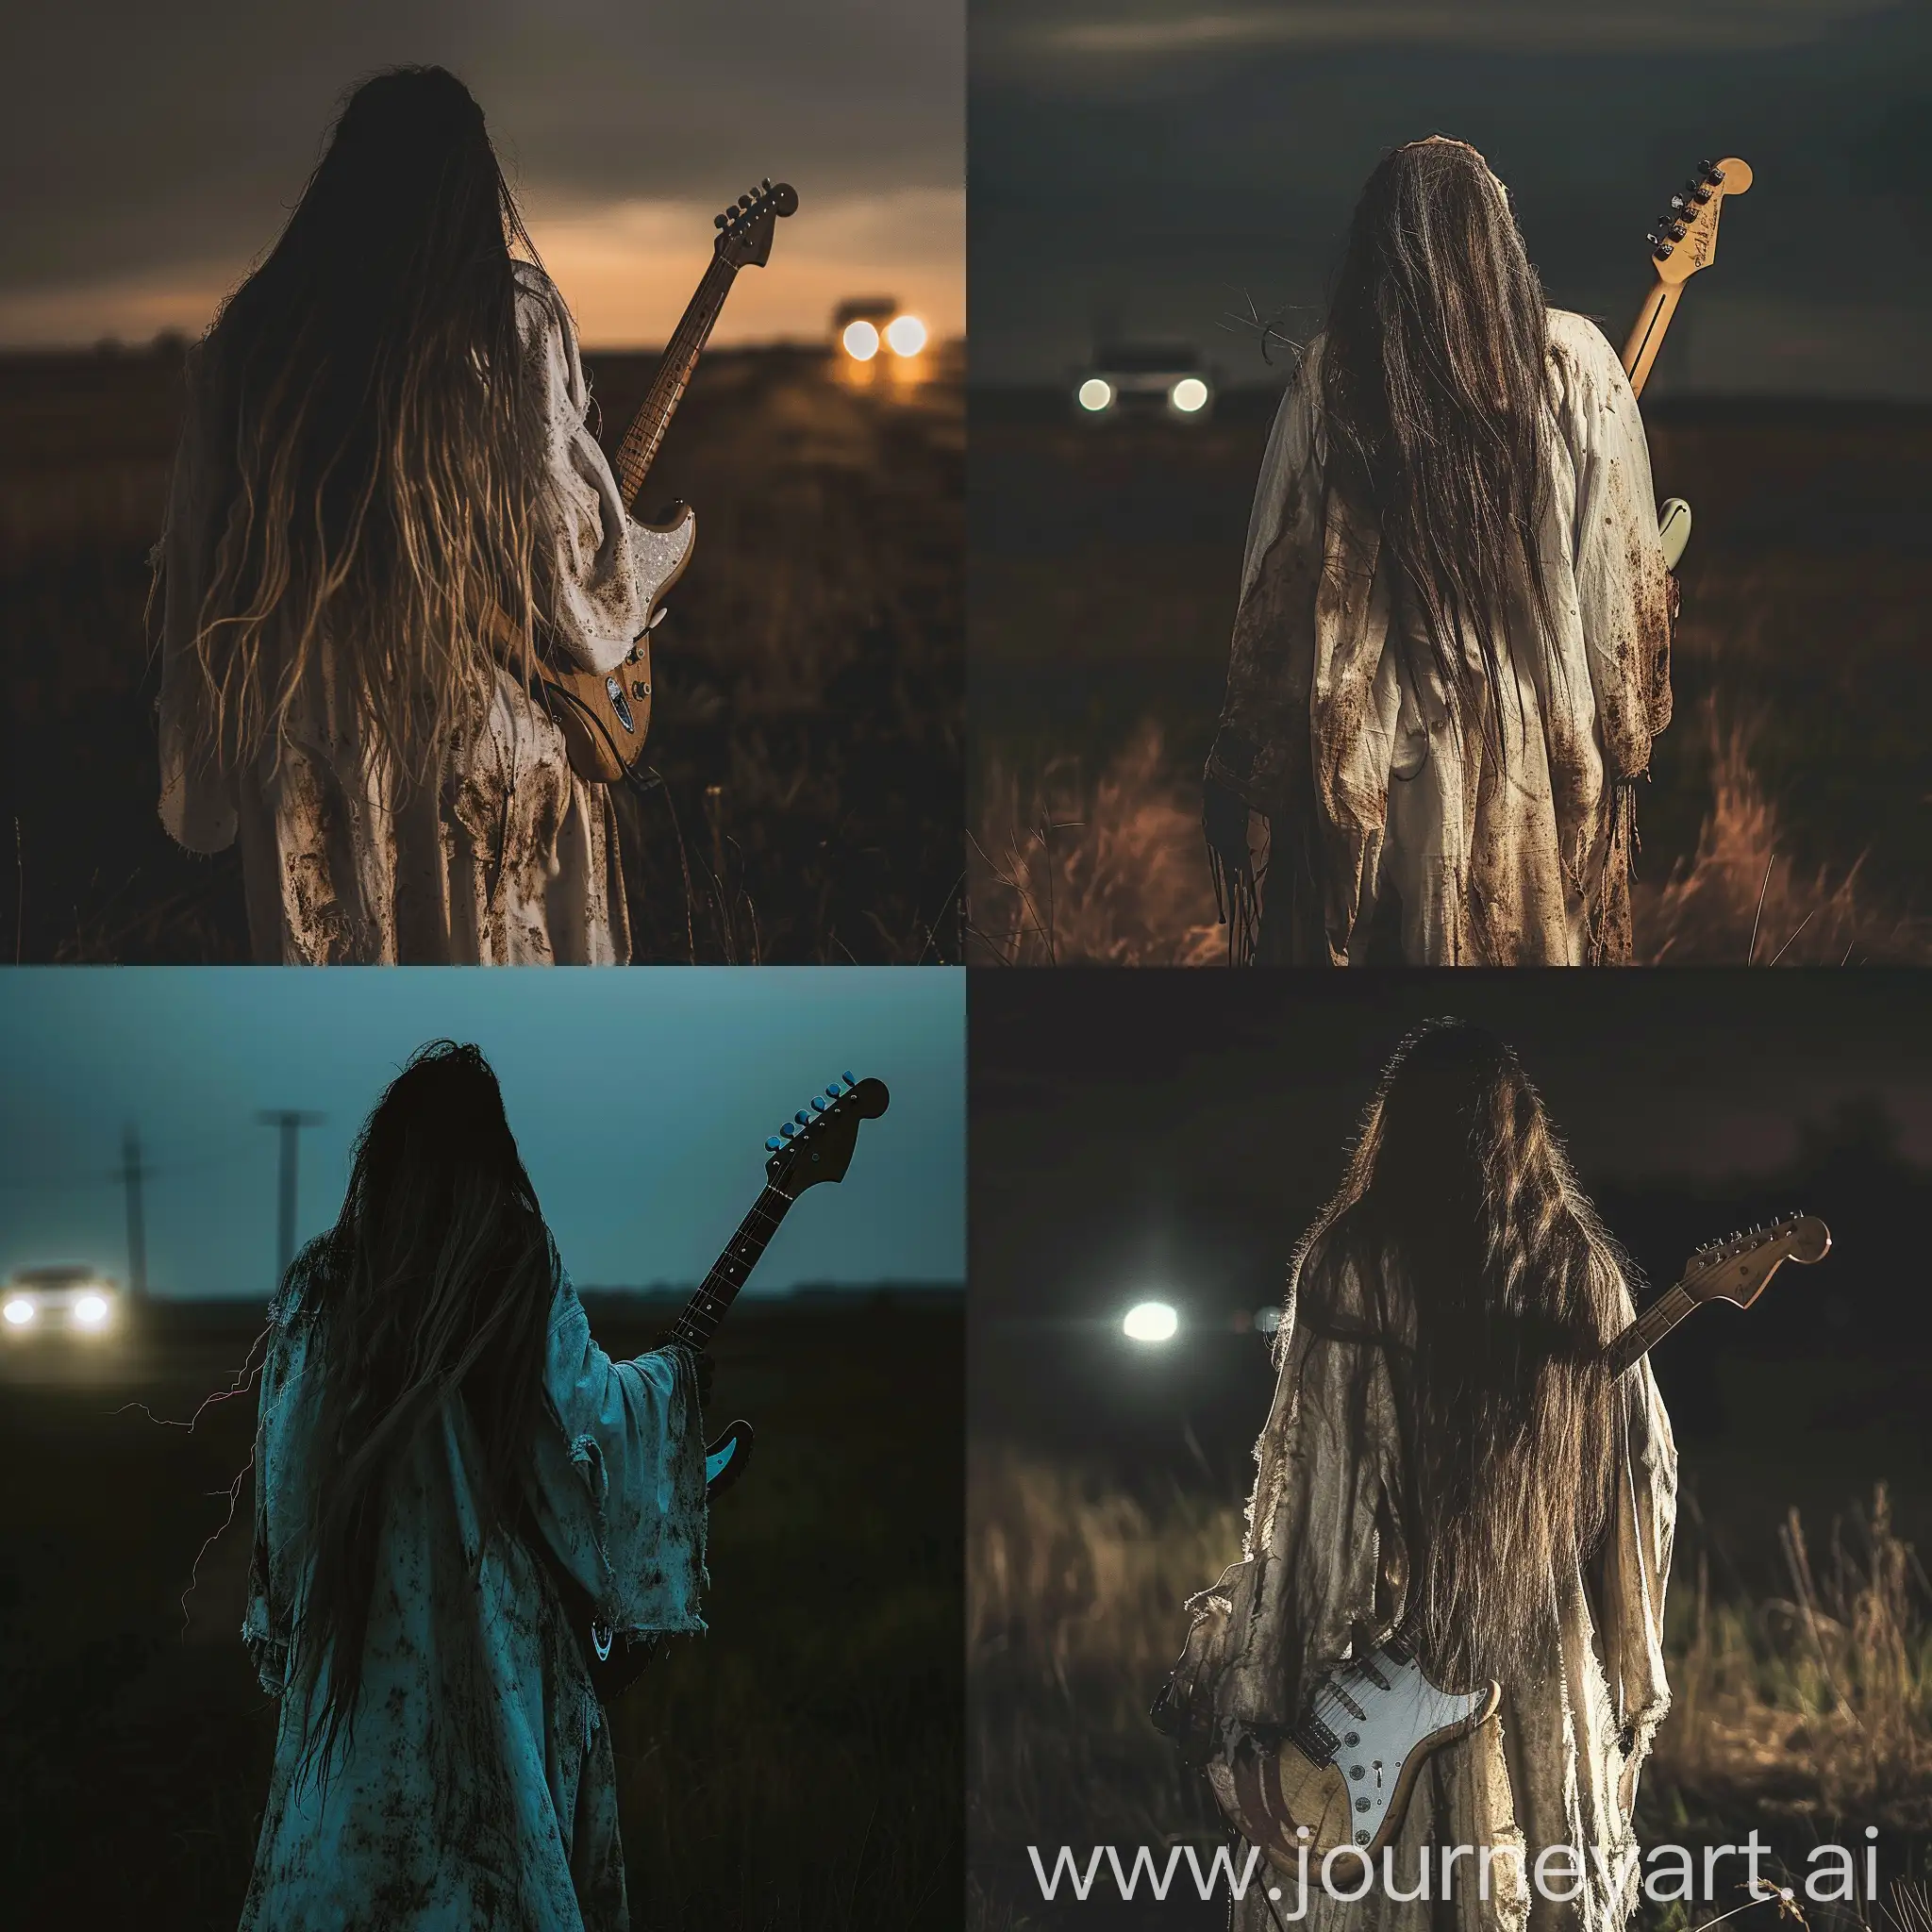 A person resembling a ghost, with long hair, in the darkness, in a creepy field, back to the camera, wearing a white eerie dirty robe, holding a superstrat electric guitar. Creepy filter, darkness, light from headlights